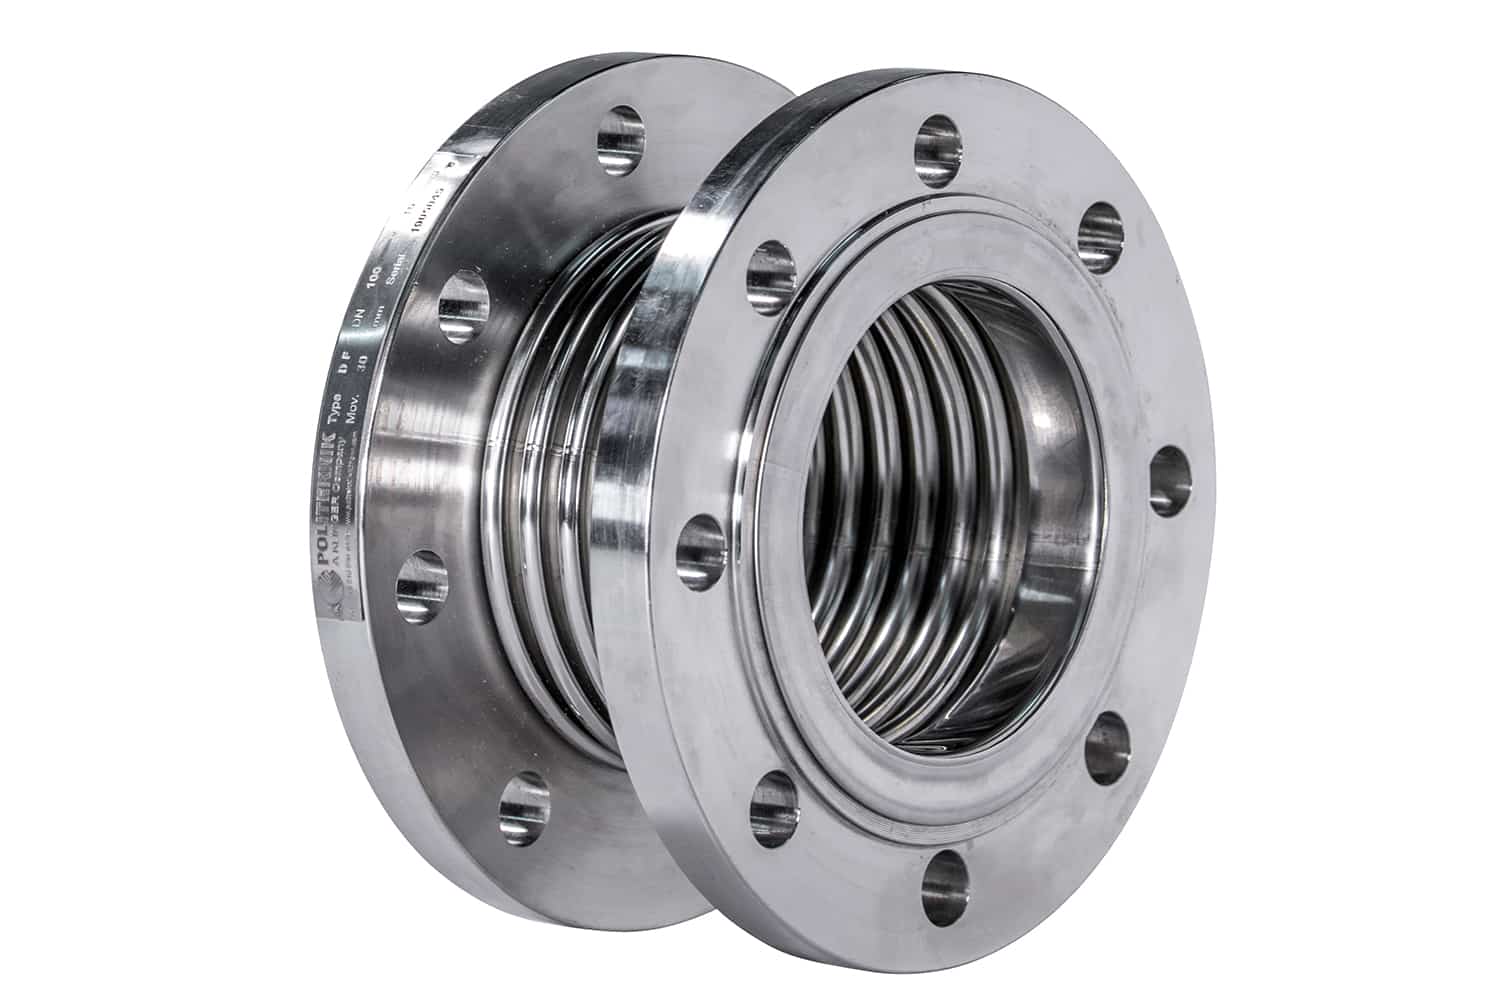 Floating flanged expansion joints